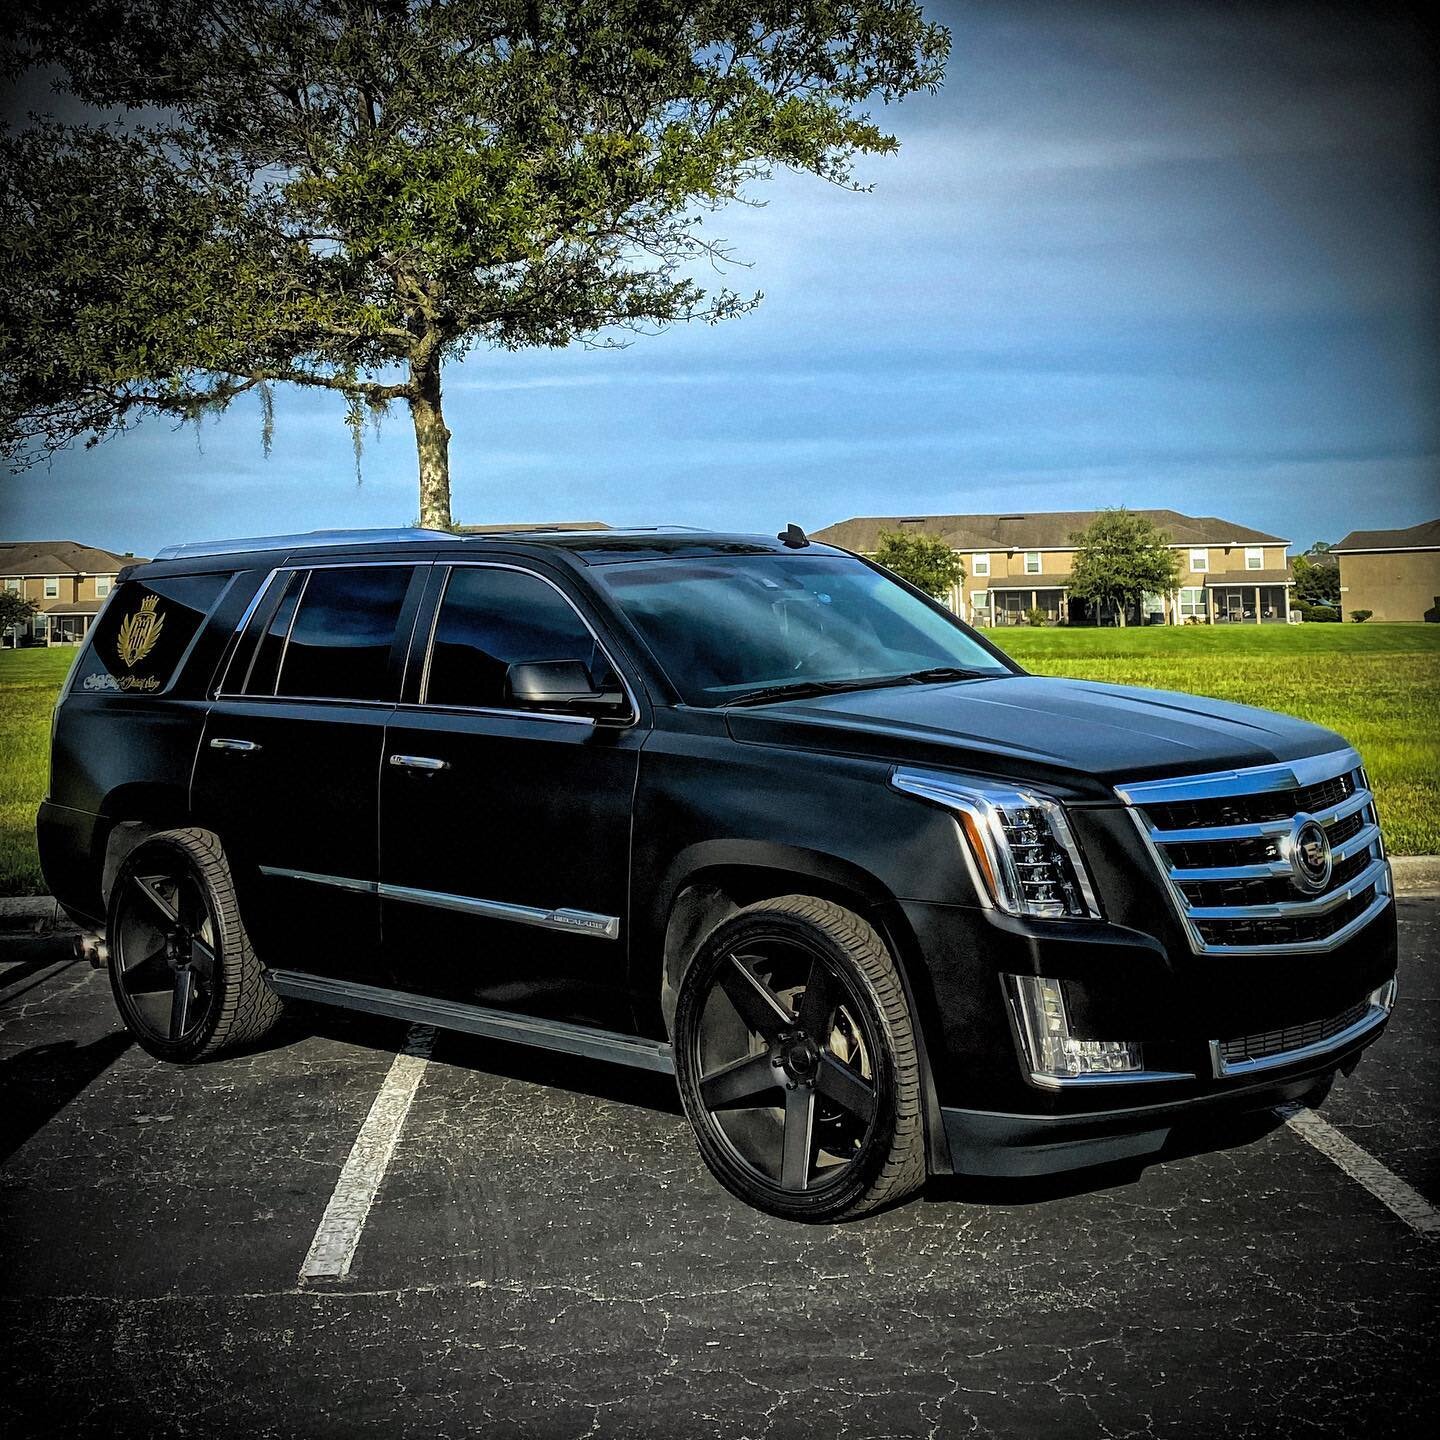 Cadillac Escalade here @carsandcoffeefleming ~When you want to &ldquo;ROCK WITH THE BEST&rdquo;, Saldivar Social holds 5 Autostyling Certifications, trained by the same facility that trains Rolls Royce, Mercedes, Ferrari, Tesla, BMW, GM &amp; Ford~ ?